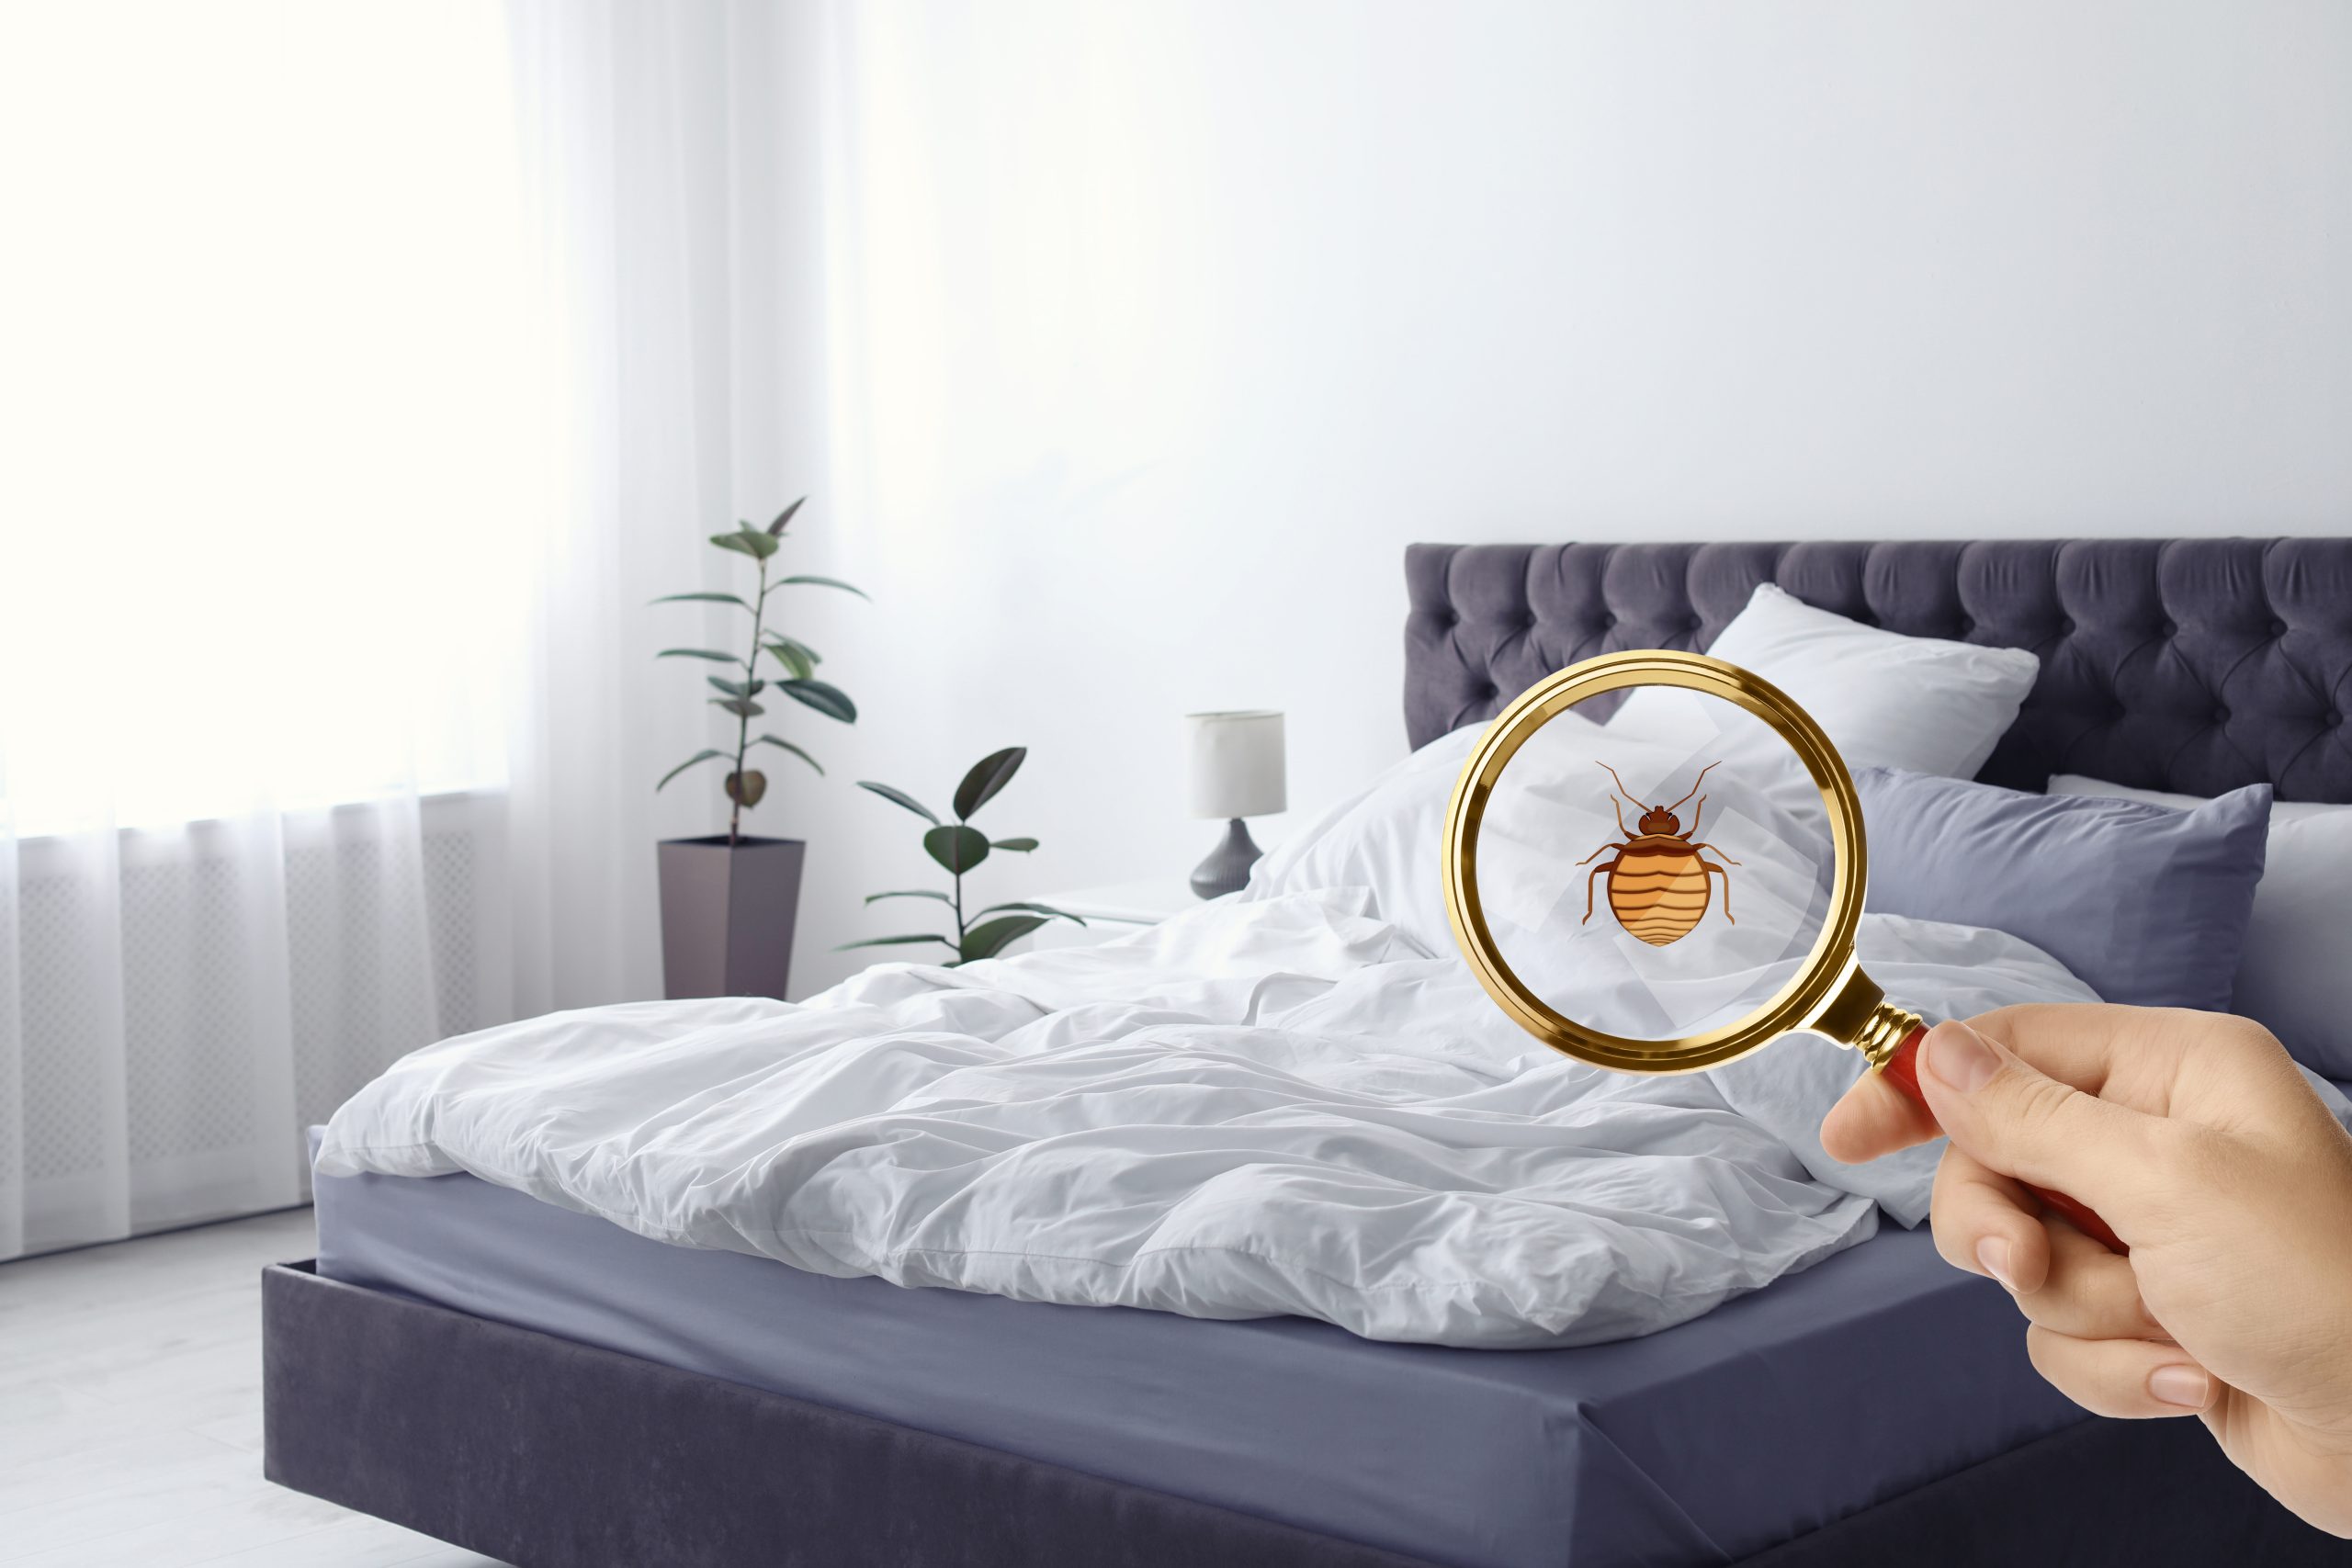 How do you know if you have bed bugs in your mattress?